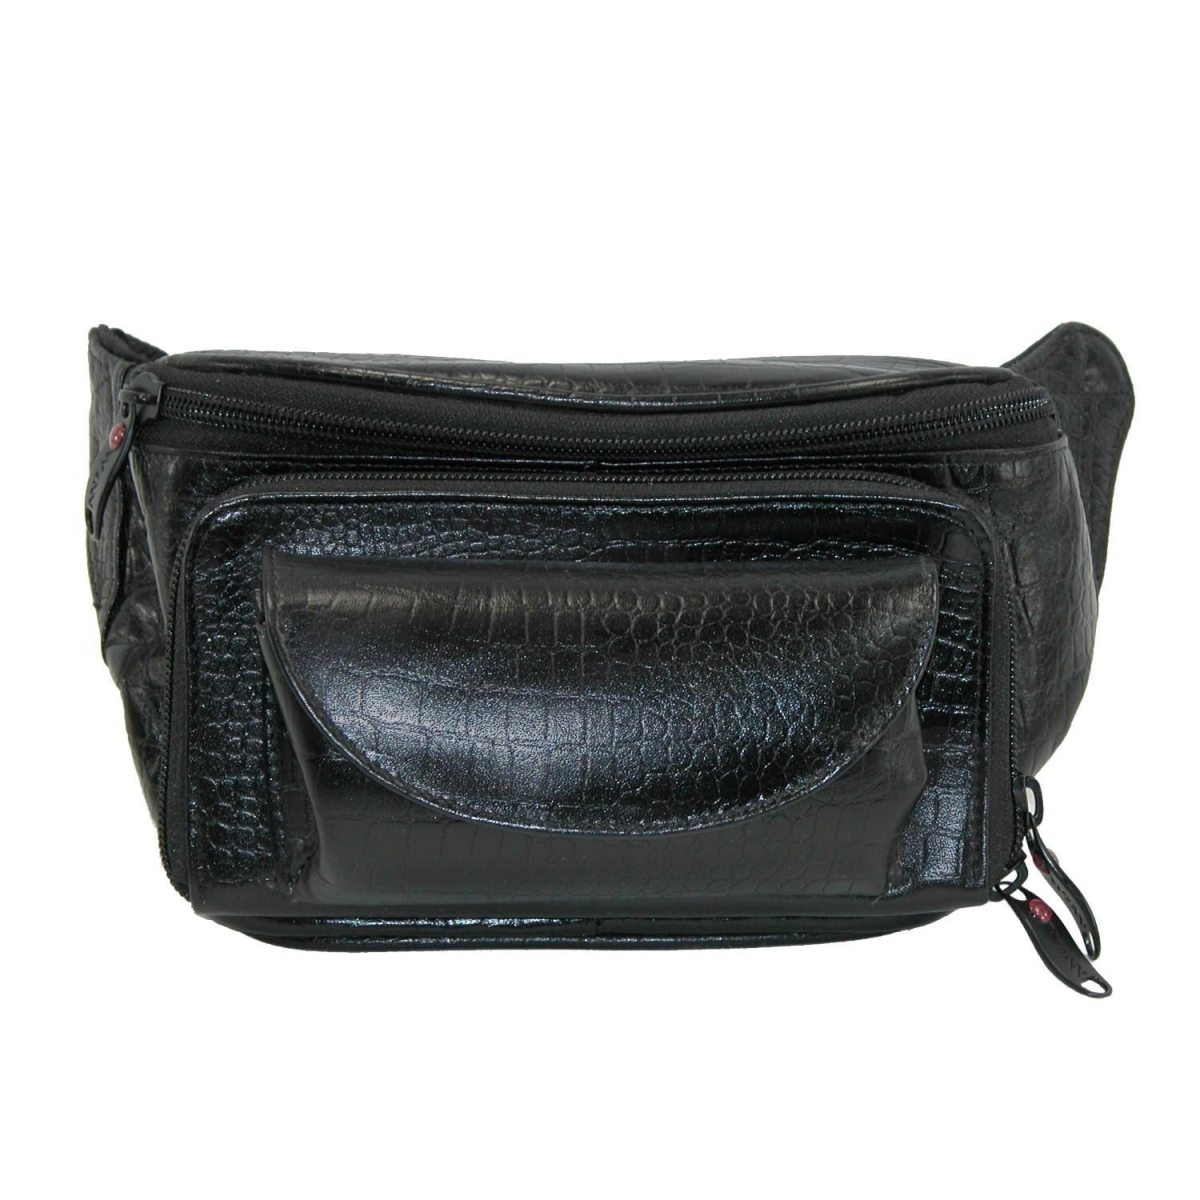 641819 Harness Cowhide Leather Large Fanny Pack, Black Faux Croc - 8 X 4.25 X 2.5 In.